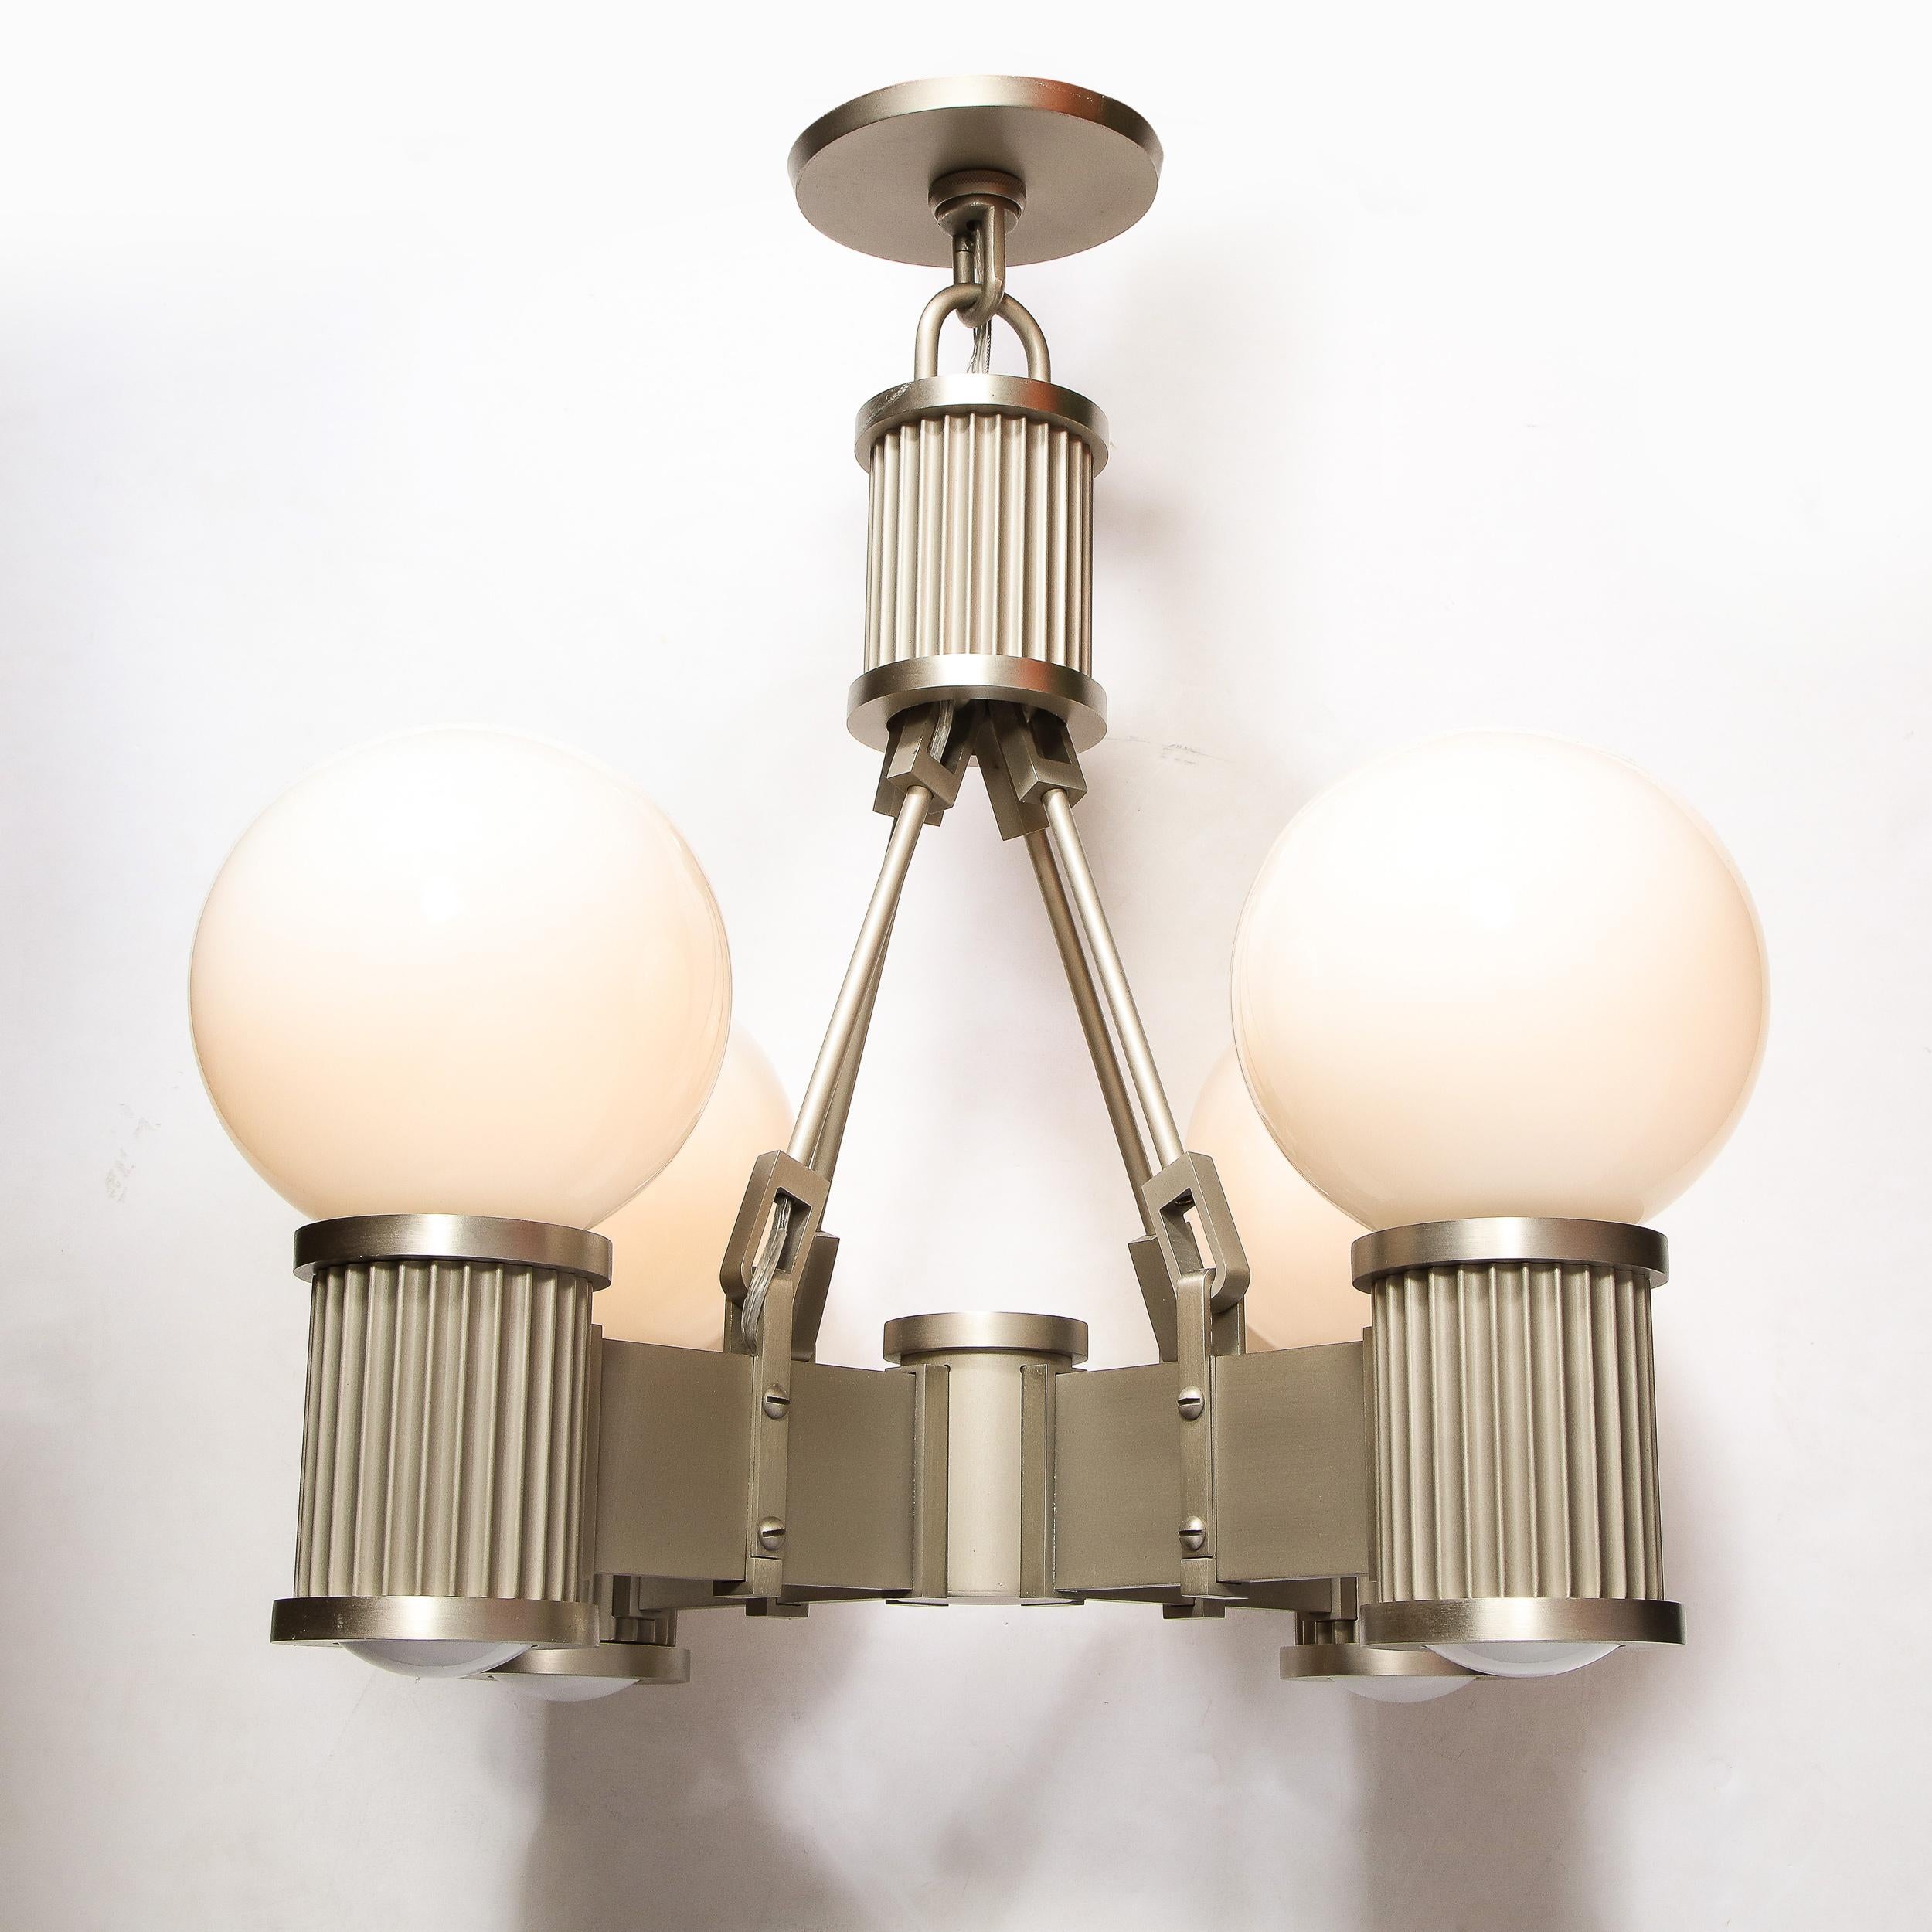 20th Century Art Deco Revival Four Arm Brushed Nickel & Frosted Glass Chandelier For Sale